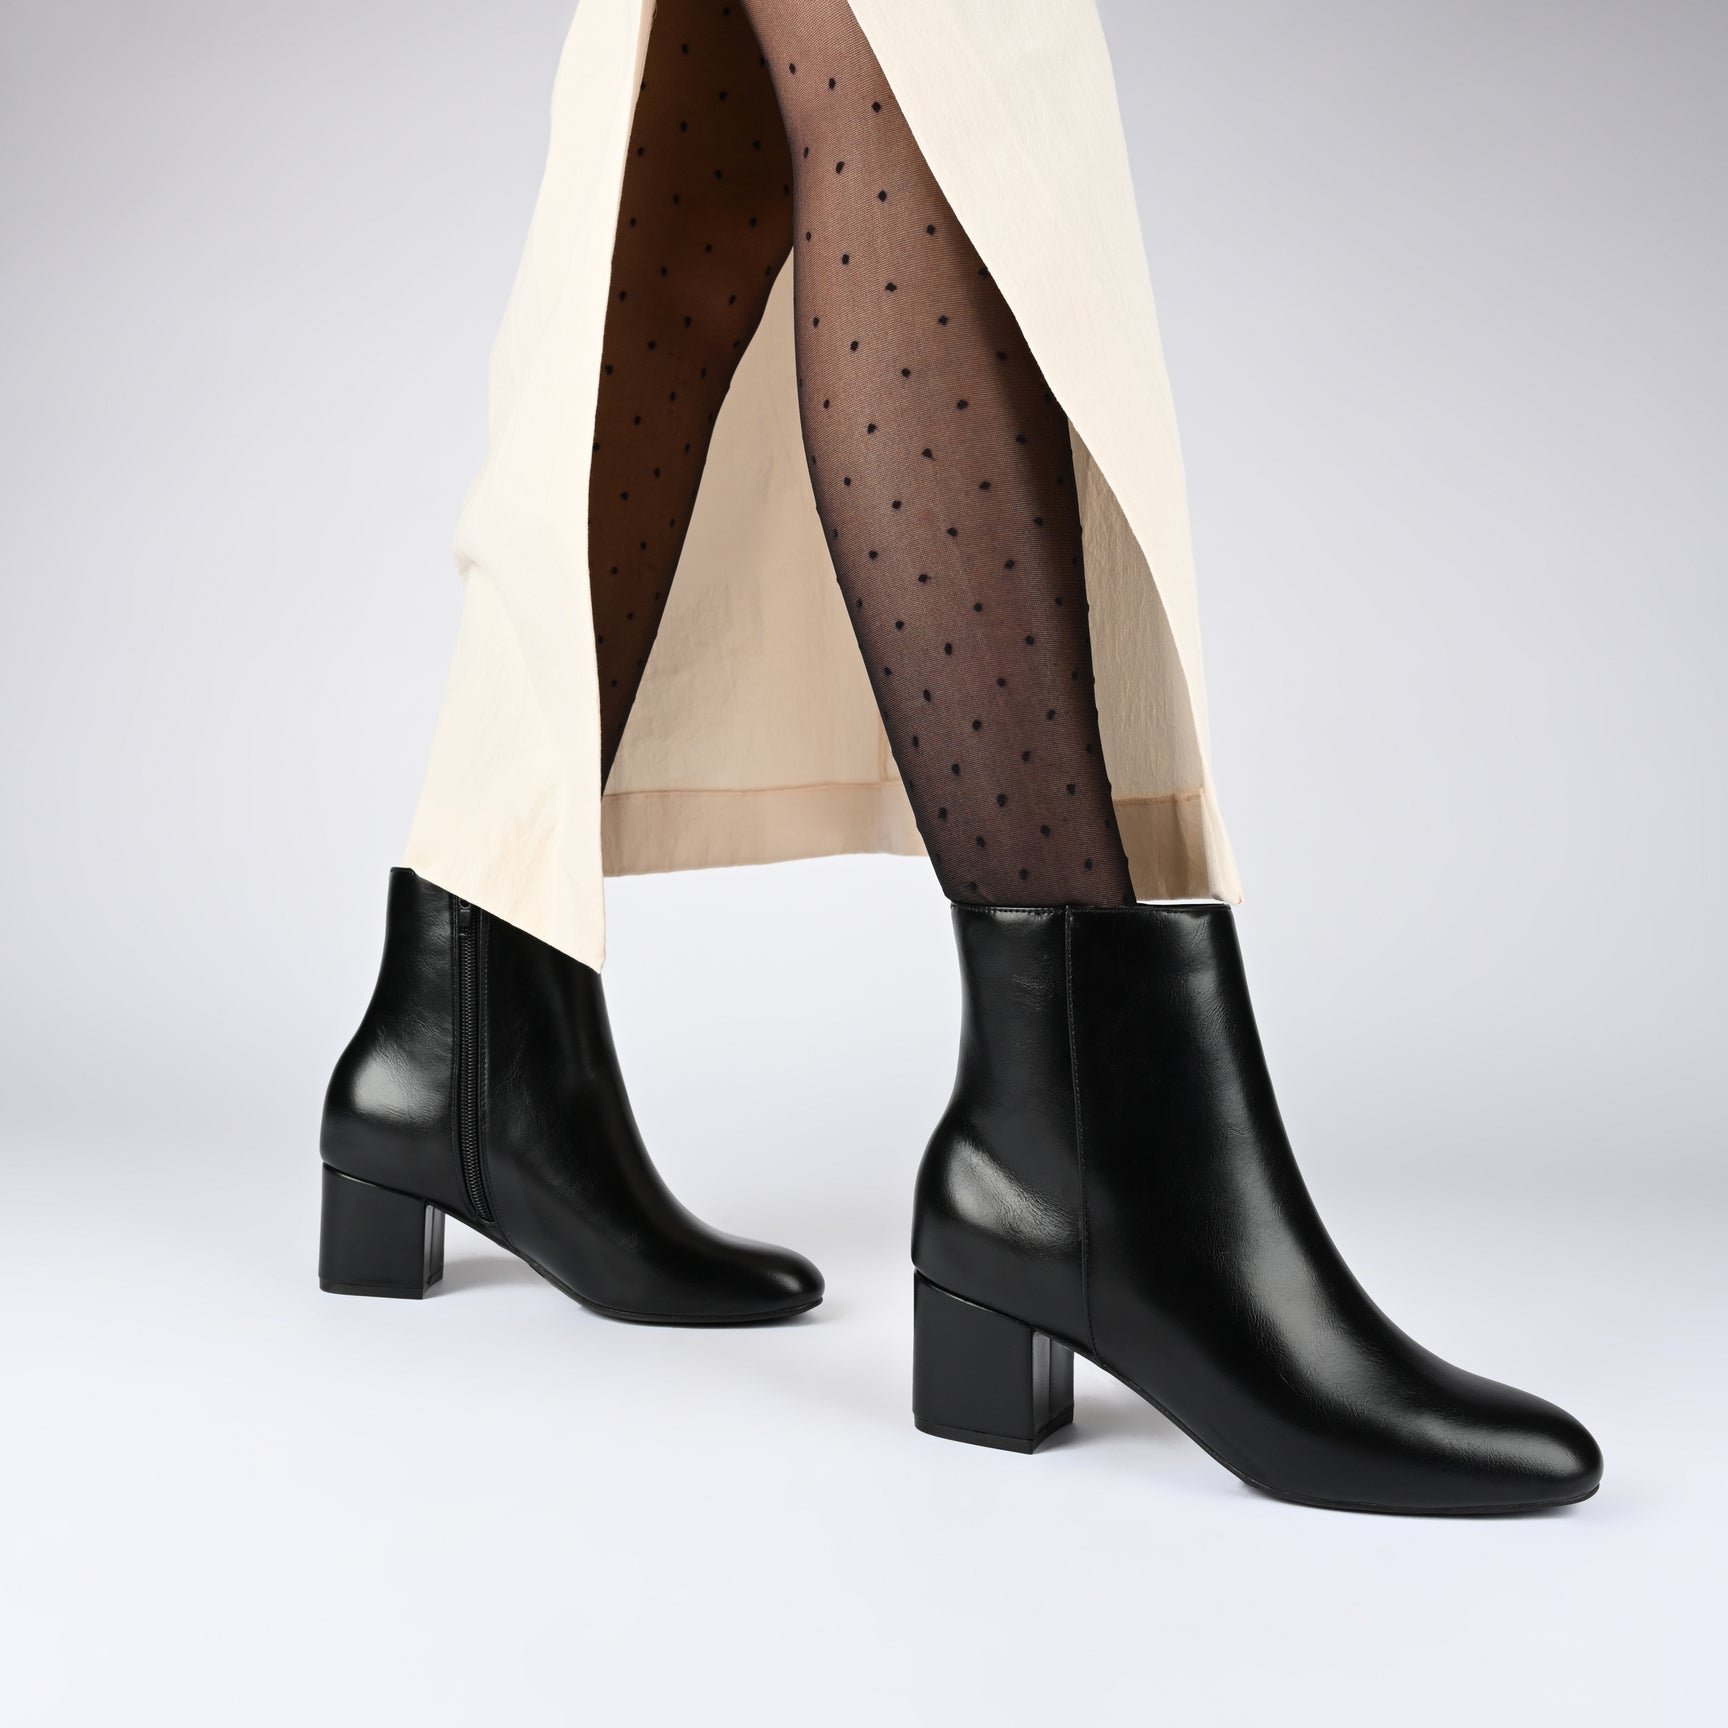 Women's Shoes – Boots, Flats, Heels & More | Journee Collection